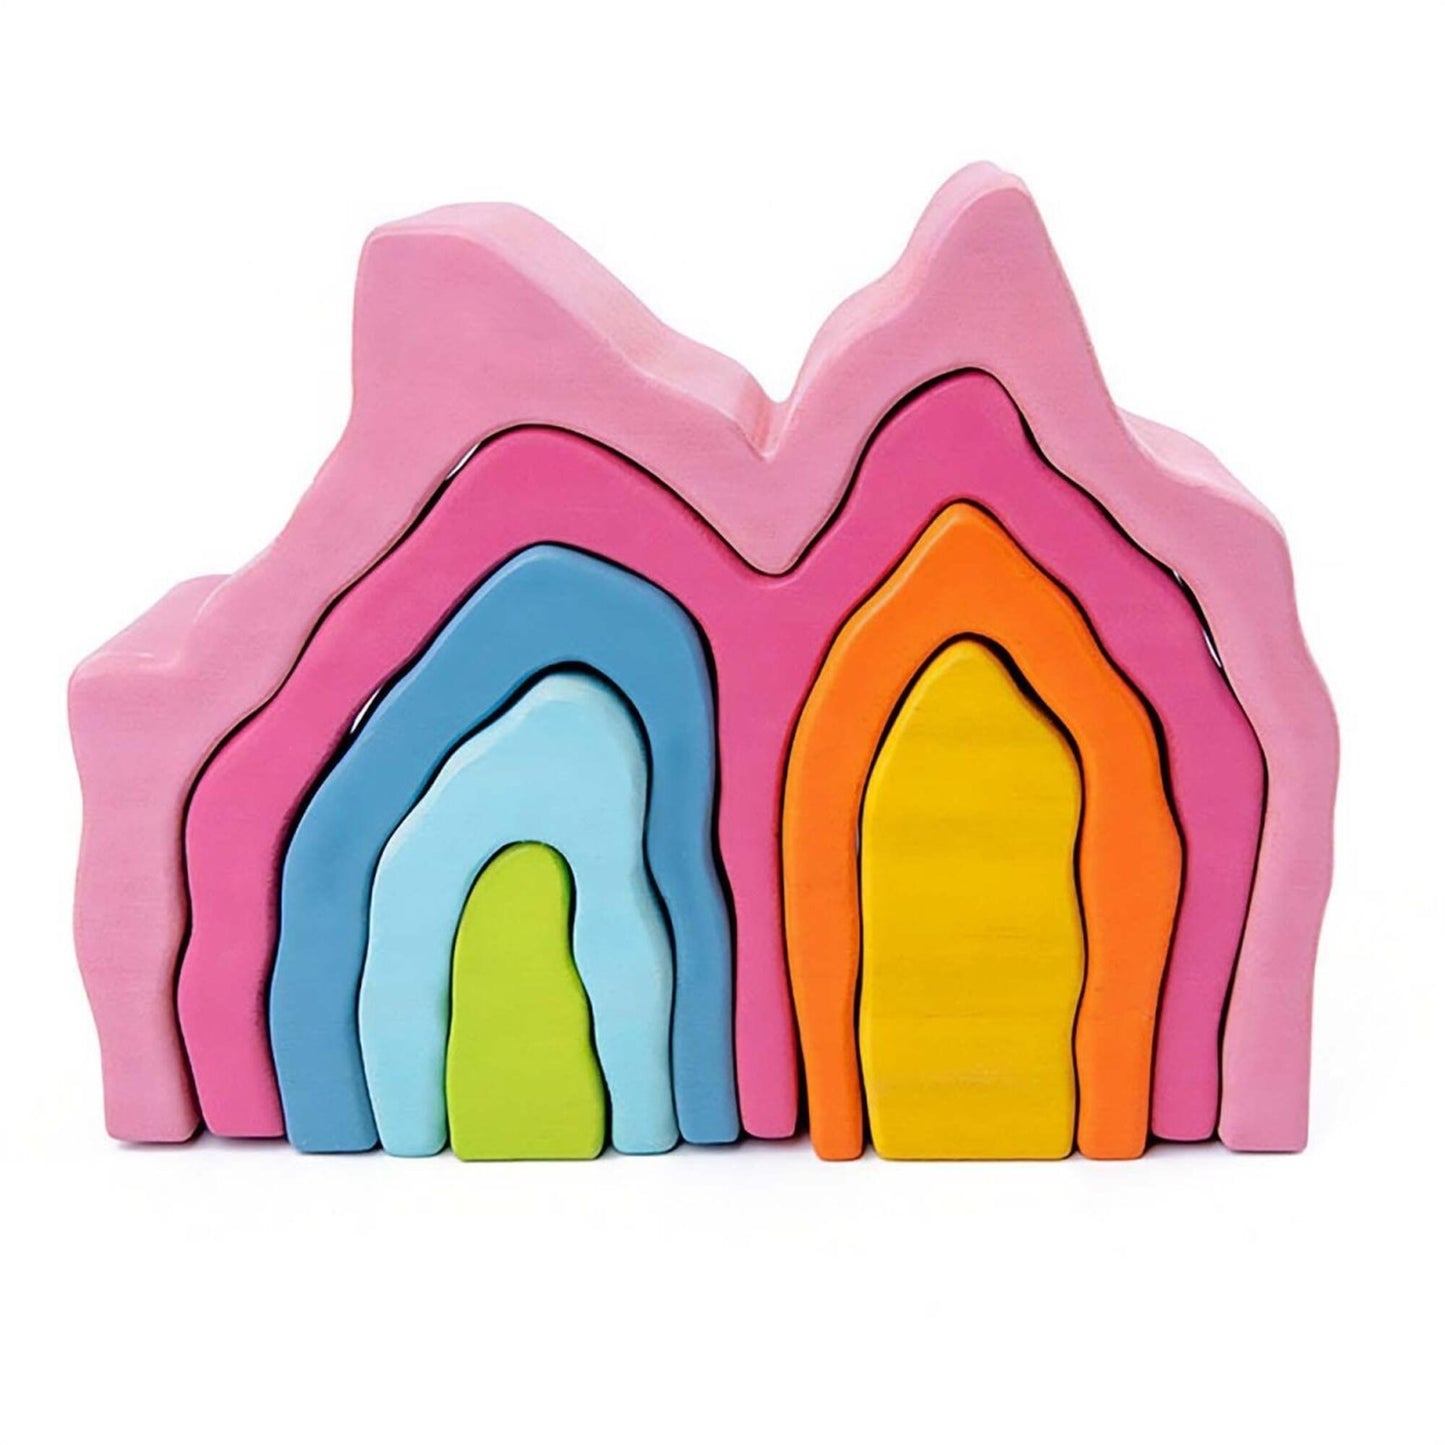 Coral Wooden Stacking Toy